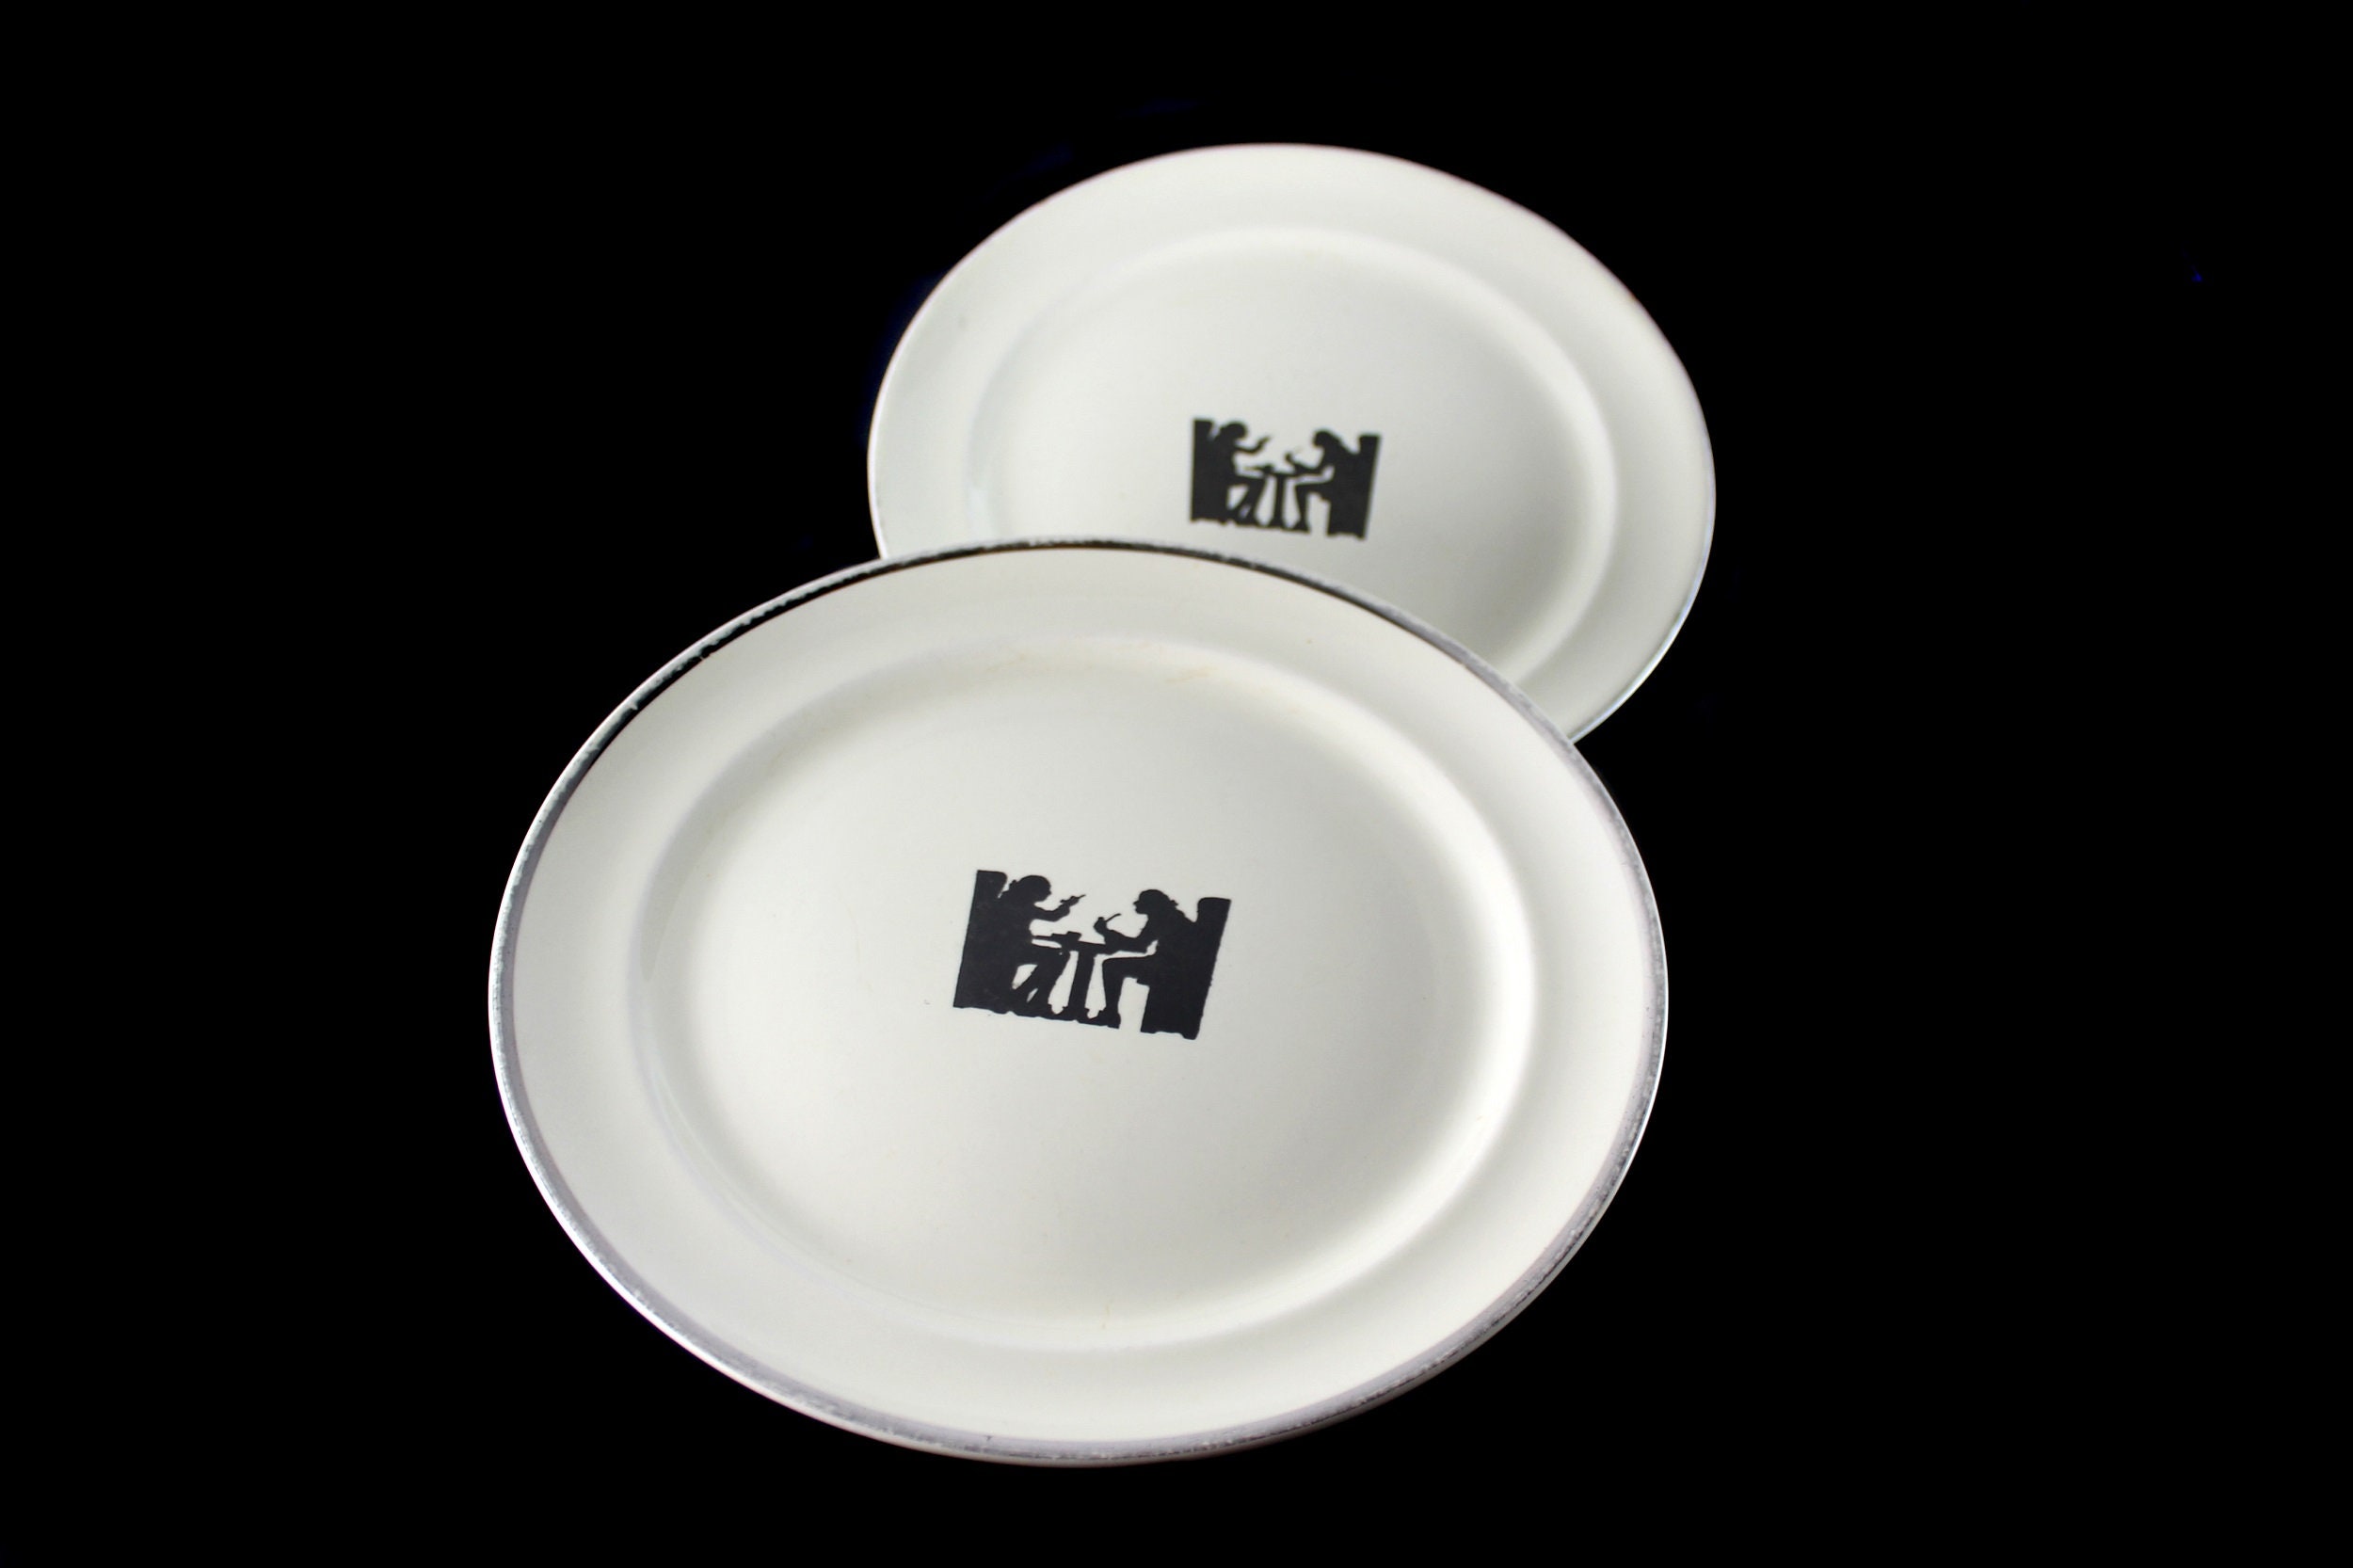 Breakfast Plates, Halls Kitchenware, Silhouette, Set of 20, Made in the ...